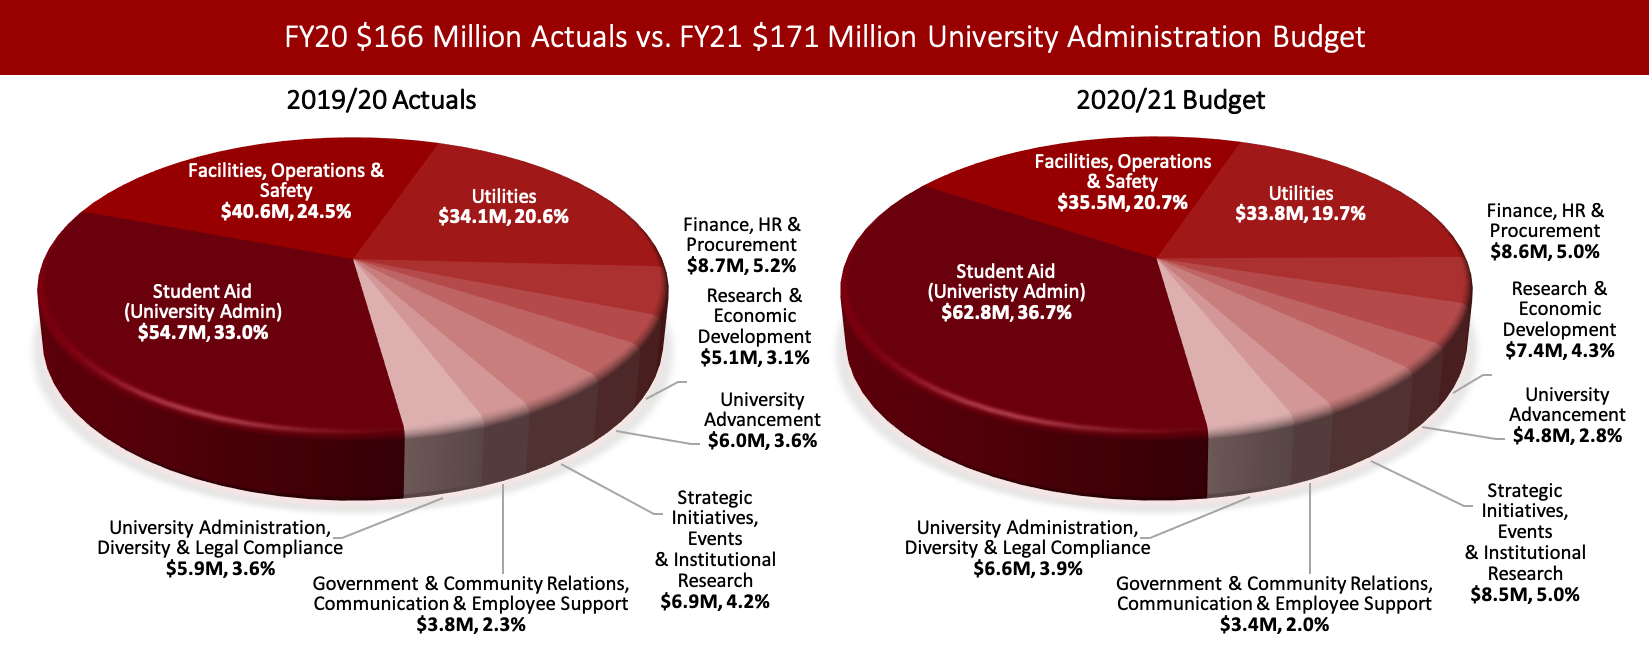 Left chart: Pie chart showing a breakdown of the $165.7 Million University Administration expense in 2019/20  Student Aid: $54.7M Facilities, Operations, & Safety: $40.6M Utilities: $34.1M Finance, HR, & Procurement: $8.7M Research & Economic Development: $5.1M University Advancement: $6.0M Strategic Initiatives, Events & Institutional Research: $6.9M Government & Community Relations, Communication, & Employee Support: $3.8M University Administration, Diversity & Legal Compliance: $5.9M. Right chart: Pie chart showing a breakdown of the $165.7 Million University Administration expense in 2020/21  Student Aid: $62.8M Facilities, Operations, & Safety: $35.5M Utilities: $33.8M Finance, HR, & Procurement: $8.6M Research & Economic Development: $7.4M University Advancement: $4.8M Strategic Initiatives, Events & Institutional Research: $8.5M Government & Community Relations, Communication, & Employee Support: $3.4M University Administration, Diversity & Legal Compliance: $6.6M